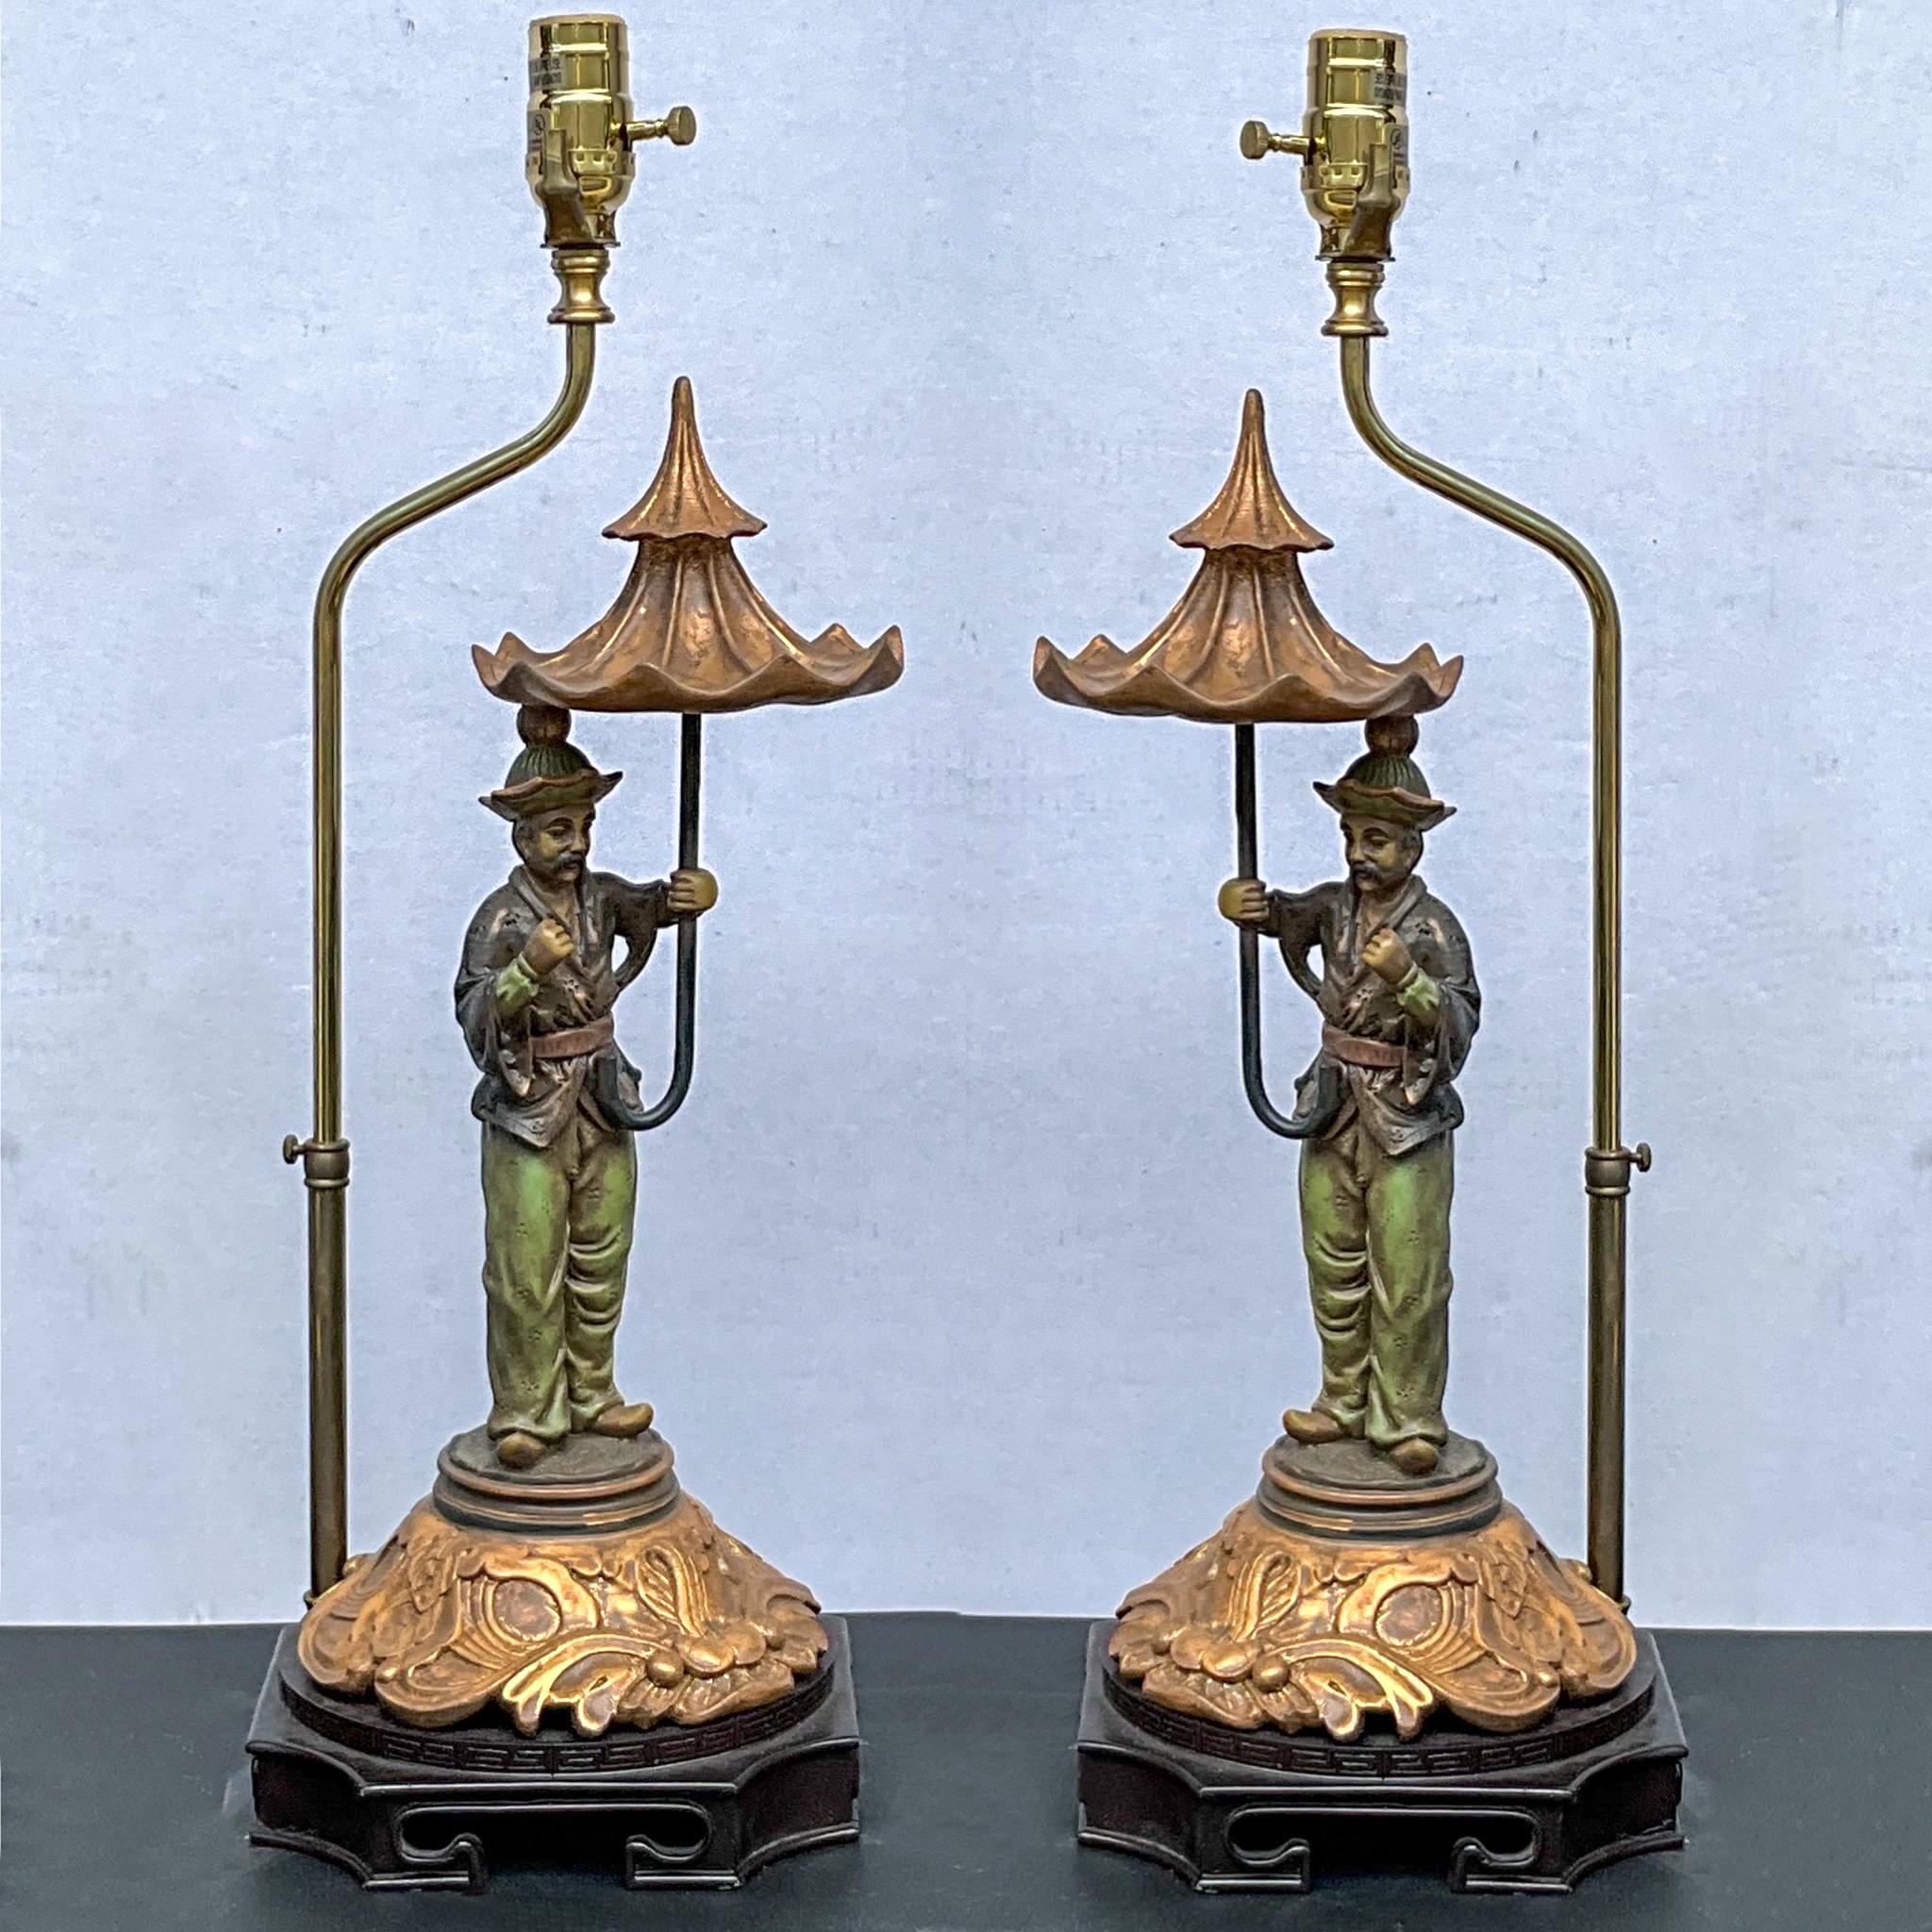 This is a lovely pair of chinoiserie table lamps attributed to Chelsea House. They depict a single Asian male holding a gilded pagoda from umbrella. The brass shade support is adjustable.  The height to the umbrella is 18 inches. 